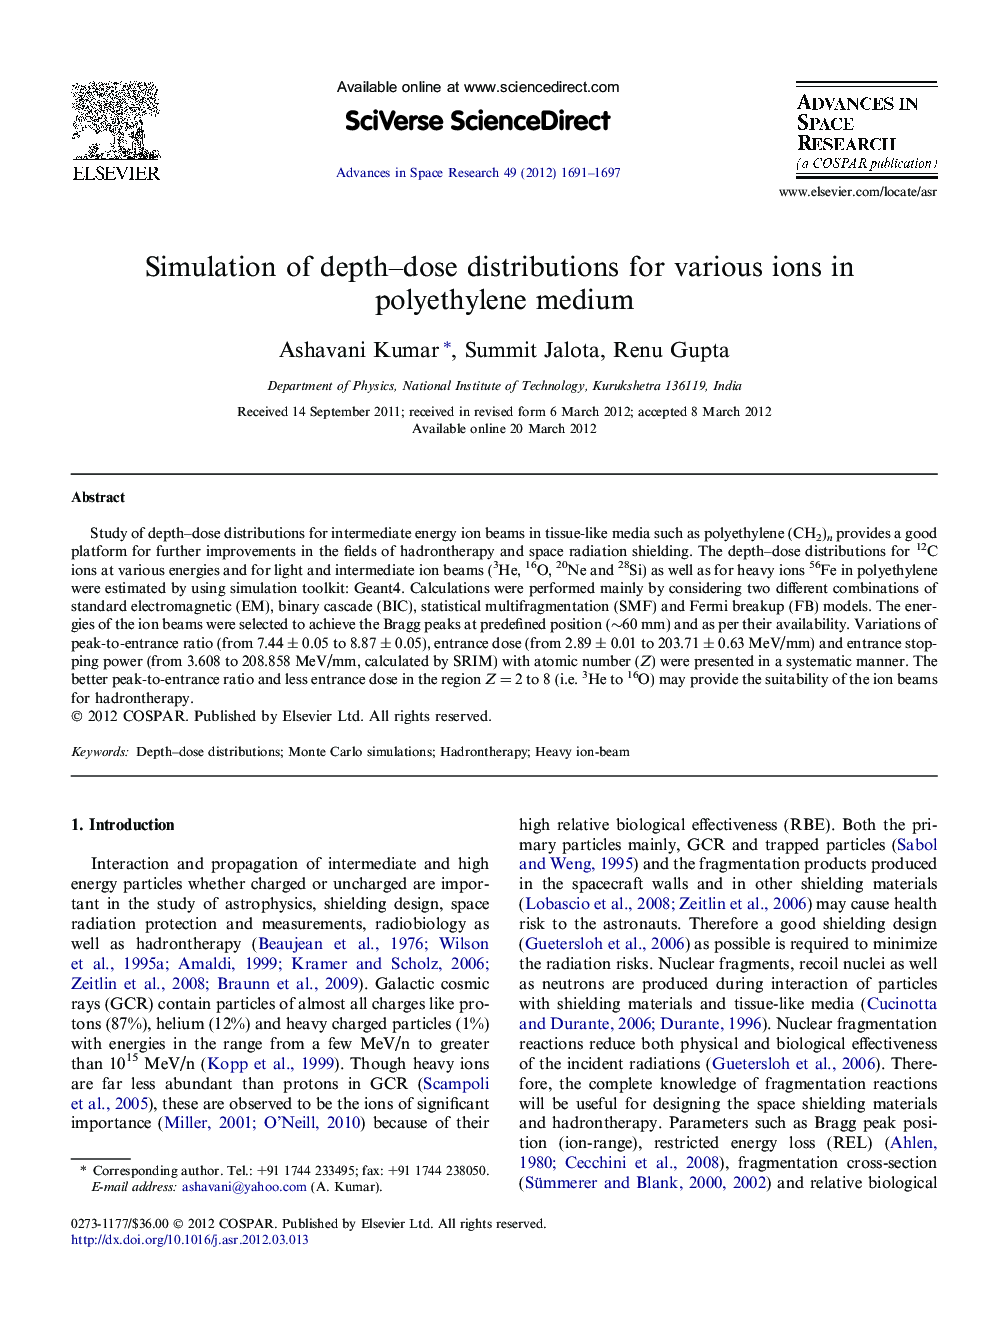 Simulation of depth–dose distributions for various ions in polyethylene medium